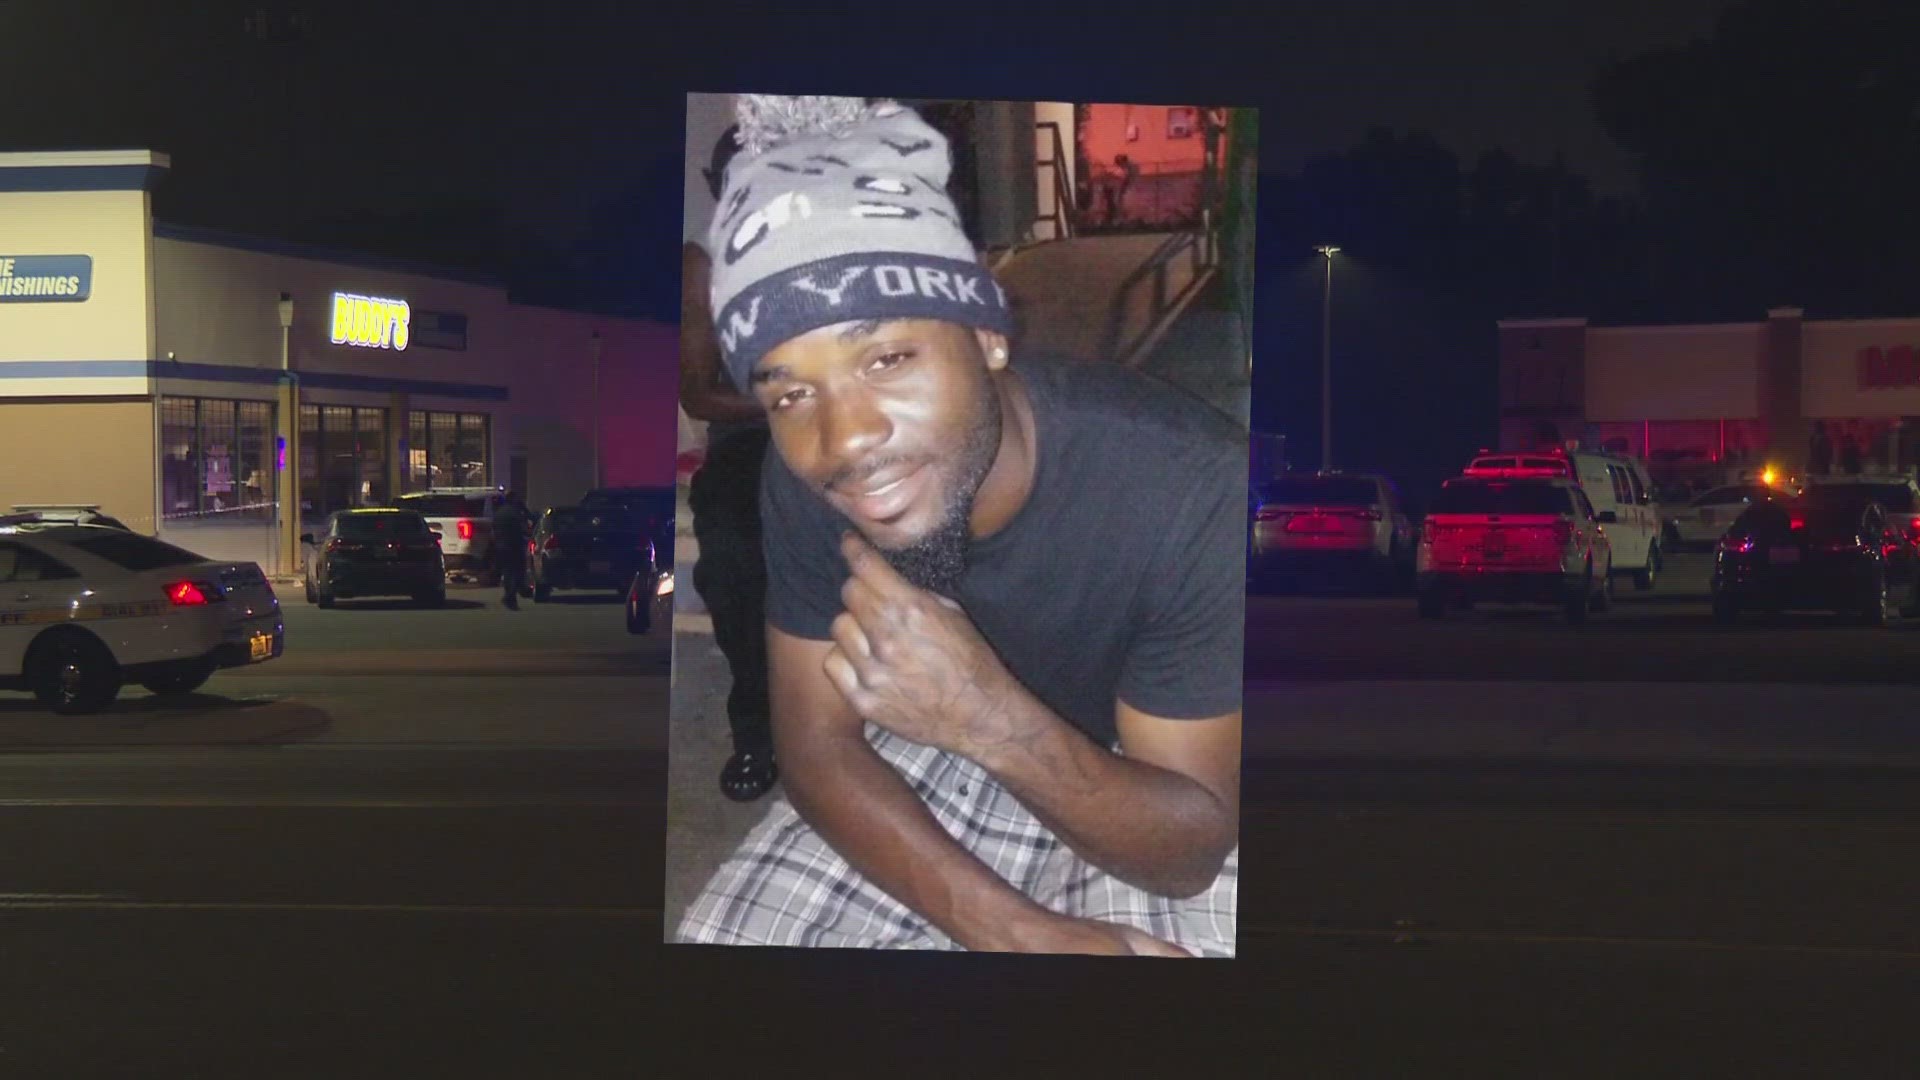 Randy Sharpe Jr. was shot and killed by officers Tuesday night after they say he pointed a gun at police.